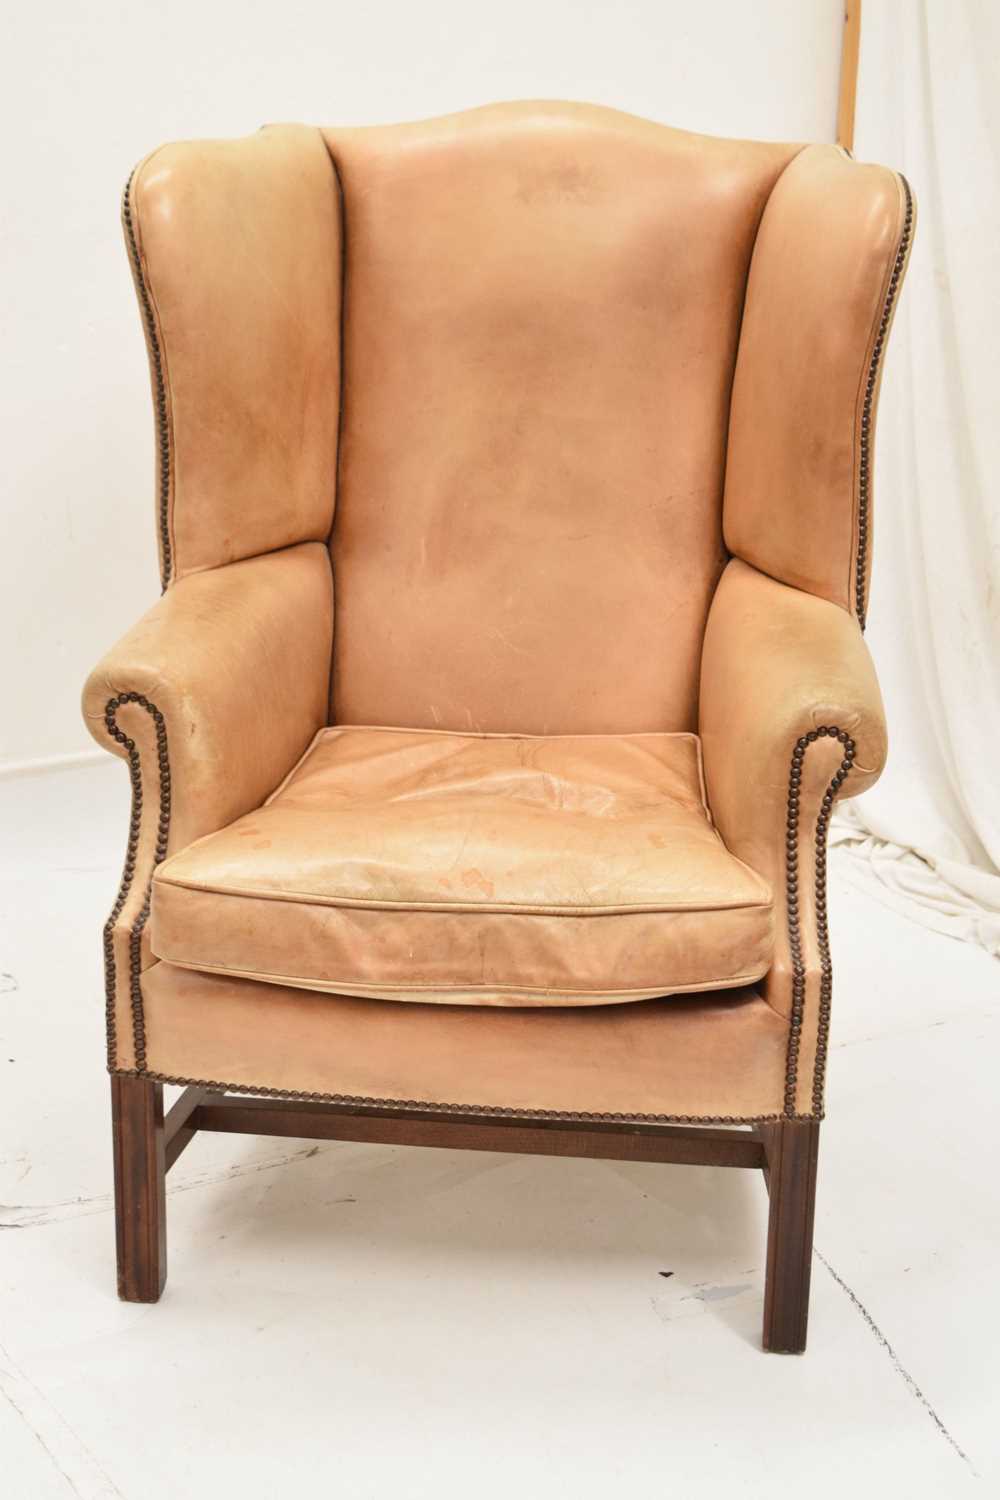 Studded pale tan leatherette wing-back office/boardroom chair - Image 3 of 7